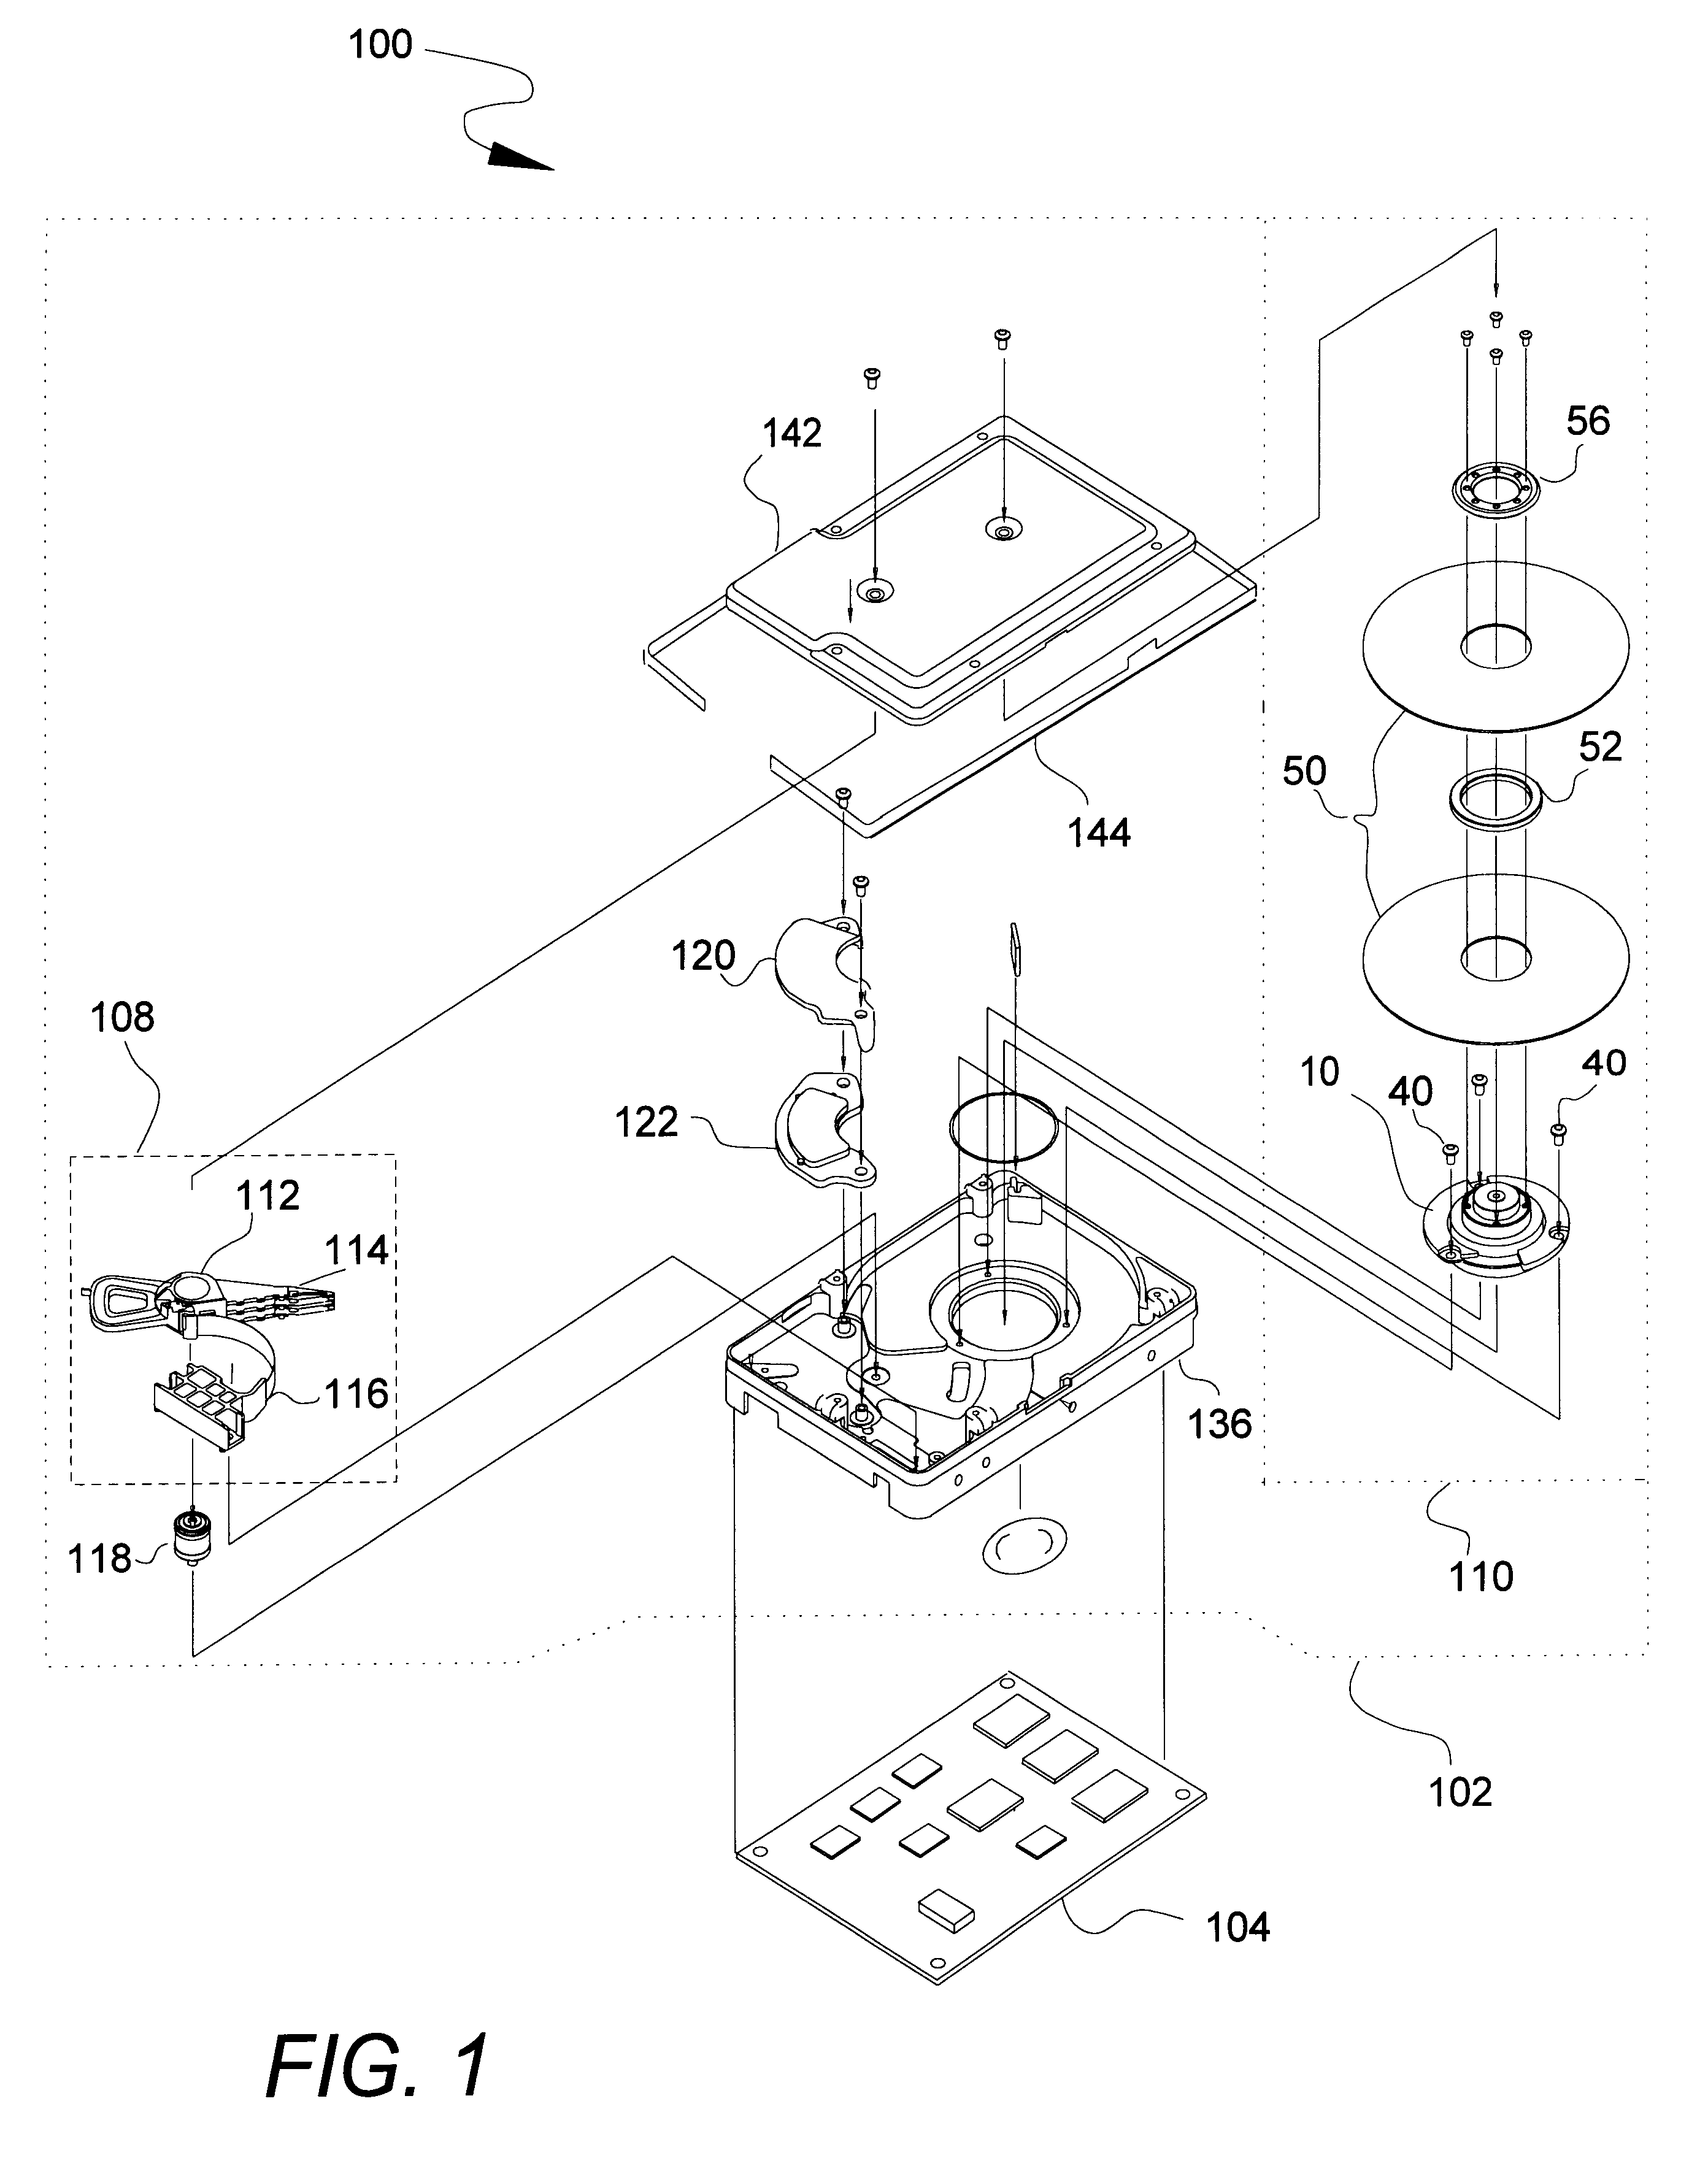 Disk drive with reduced thermal expansion induced disk slip